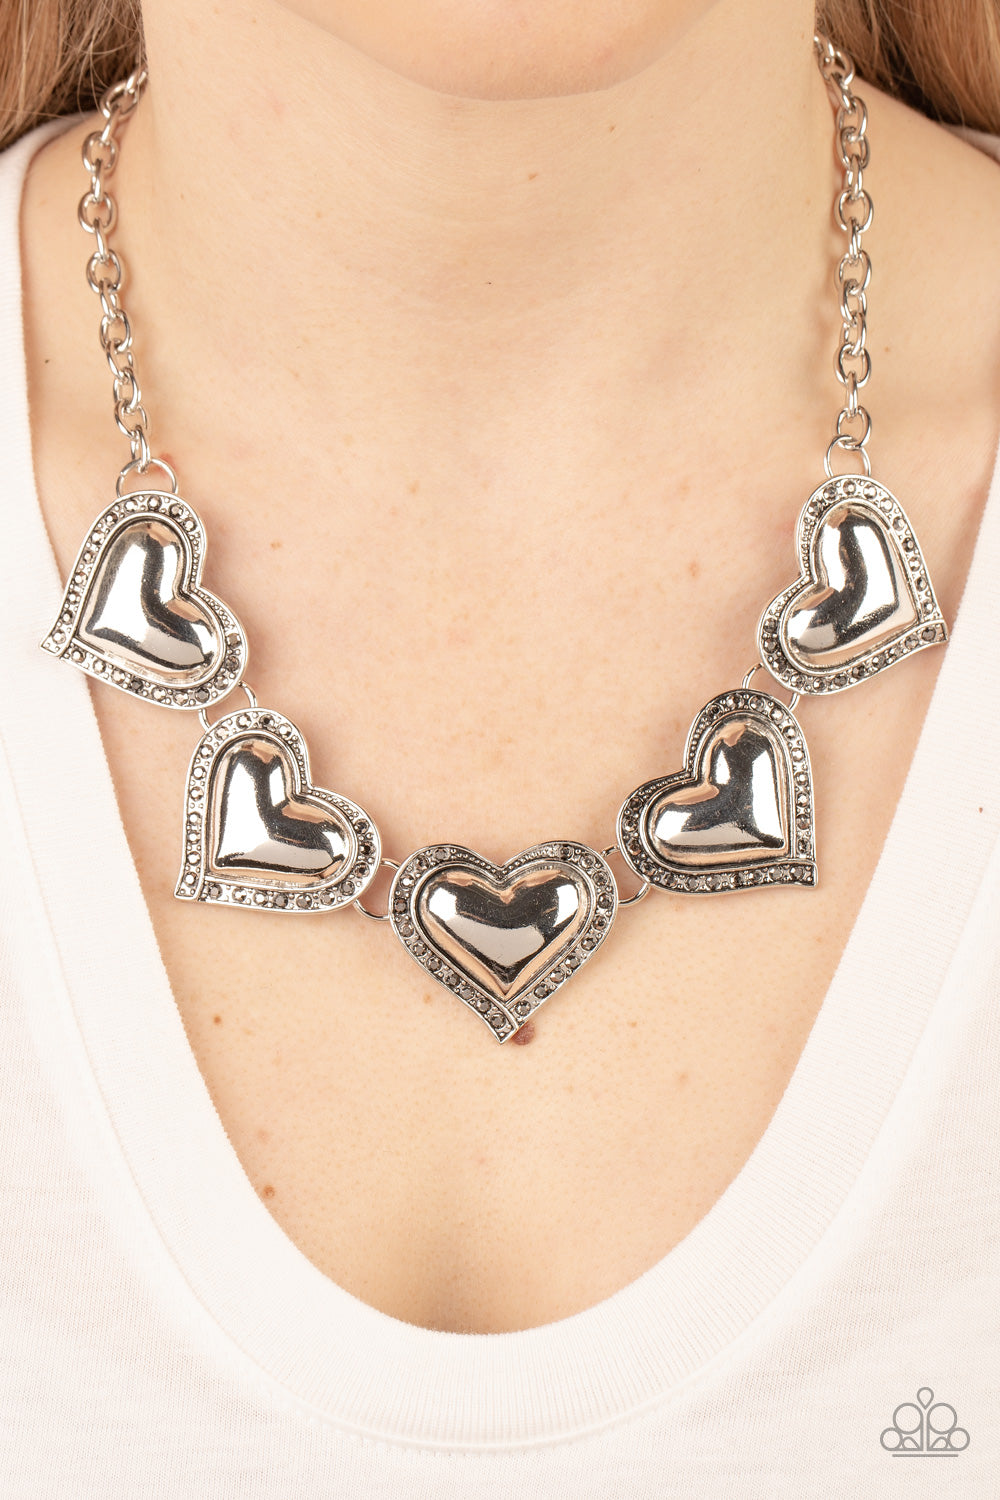 Paparazzi ♥ Kindred Hearts - Silver ♥ Necklace